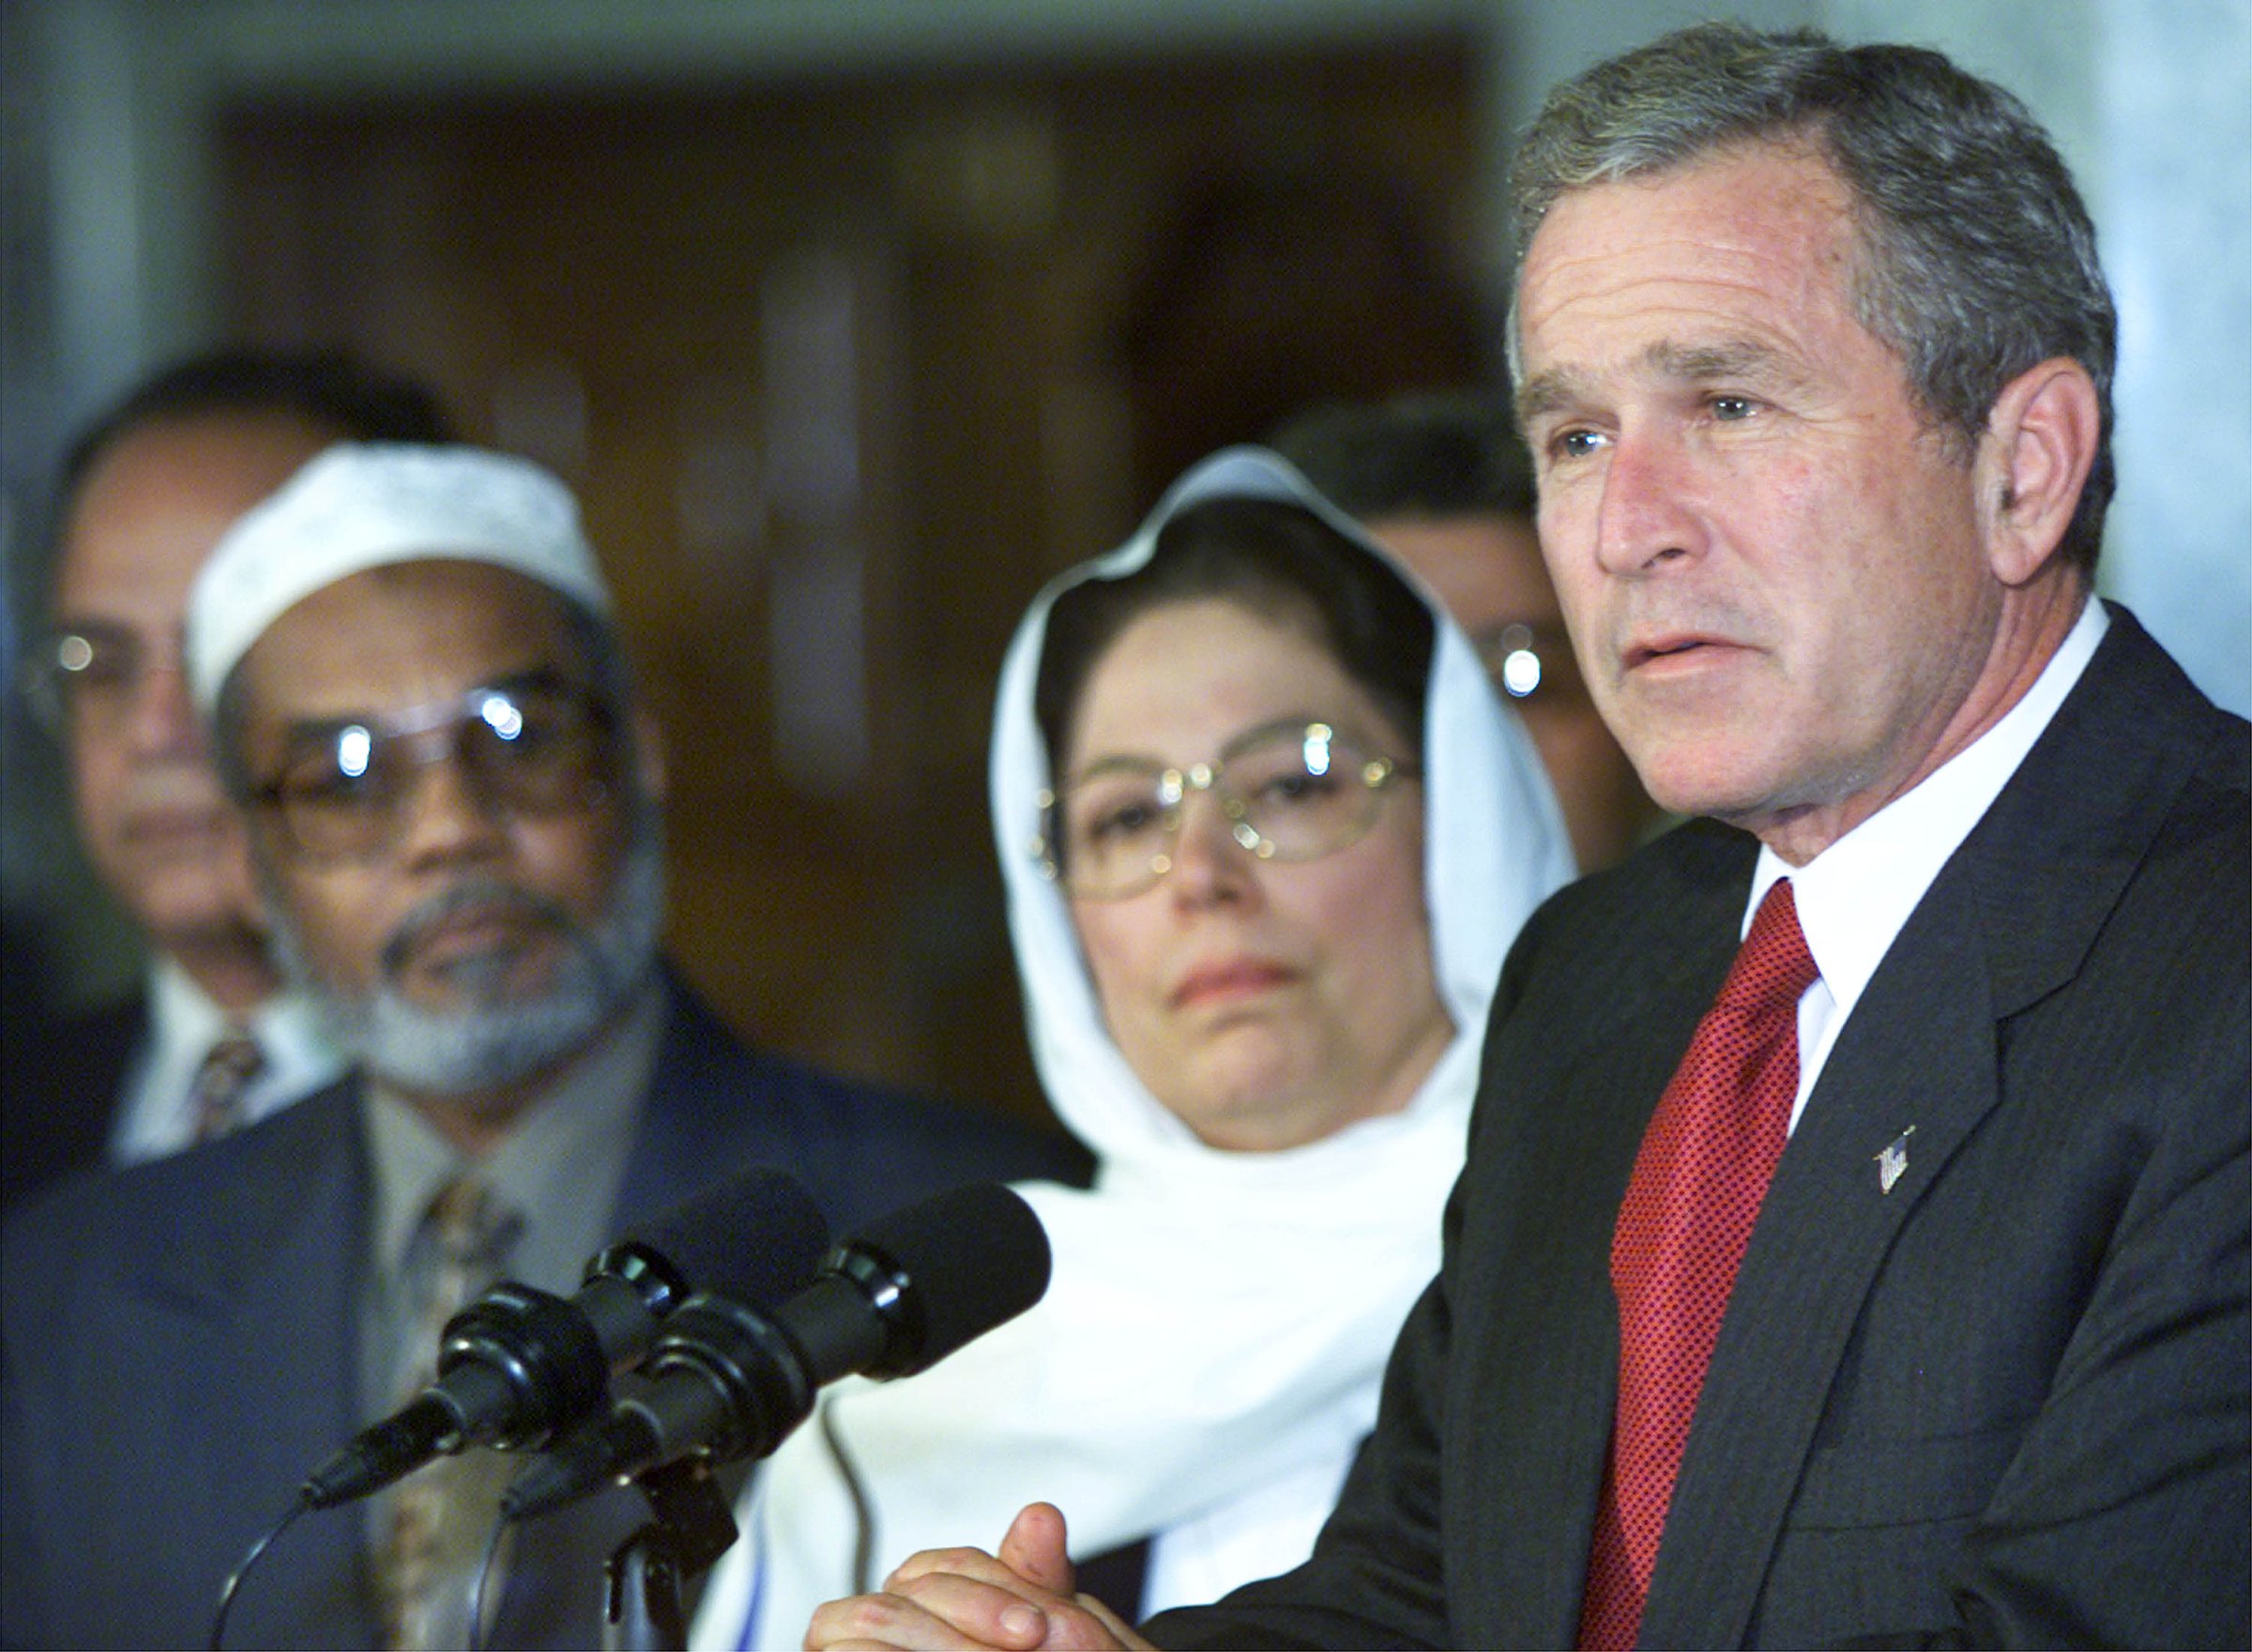 George W. Bush at an Islamic center after 9/11